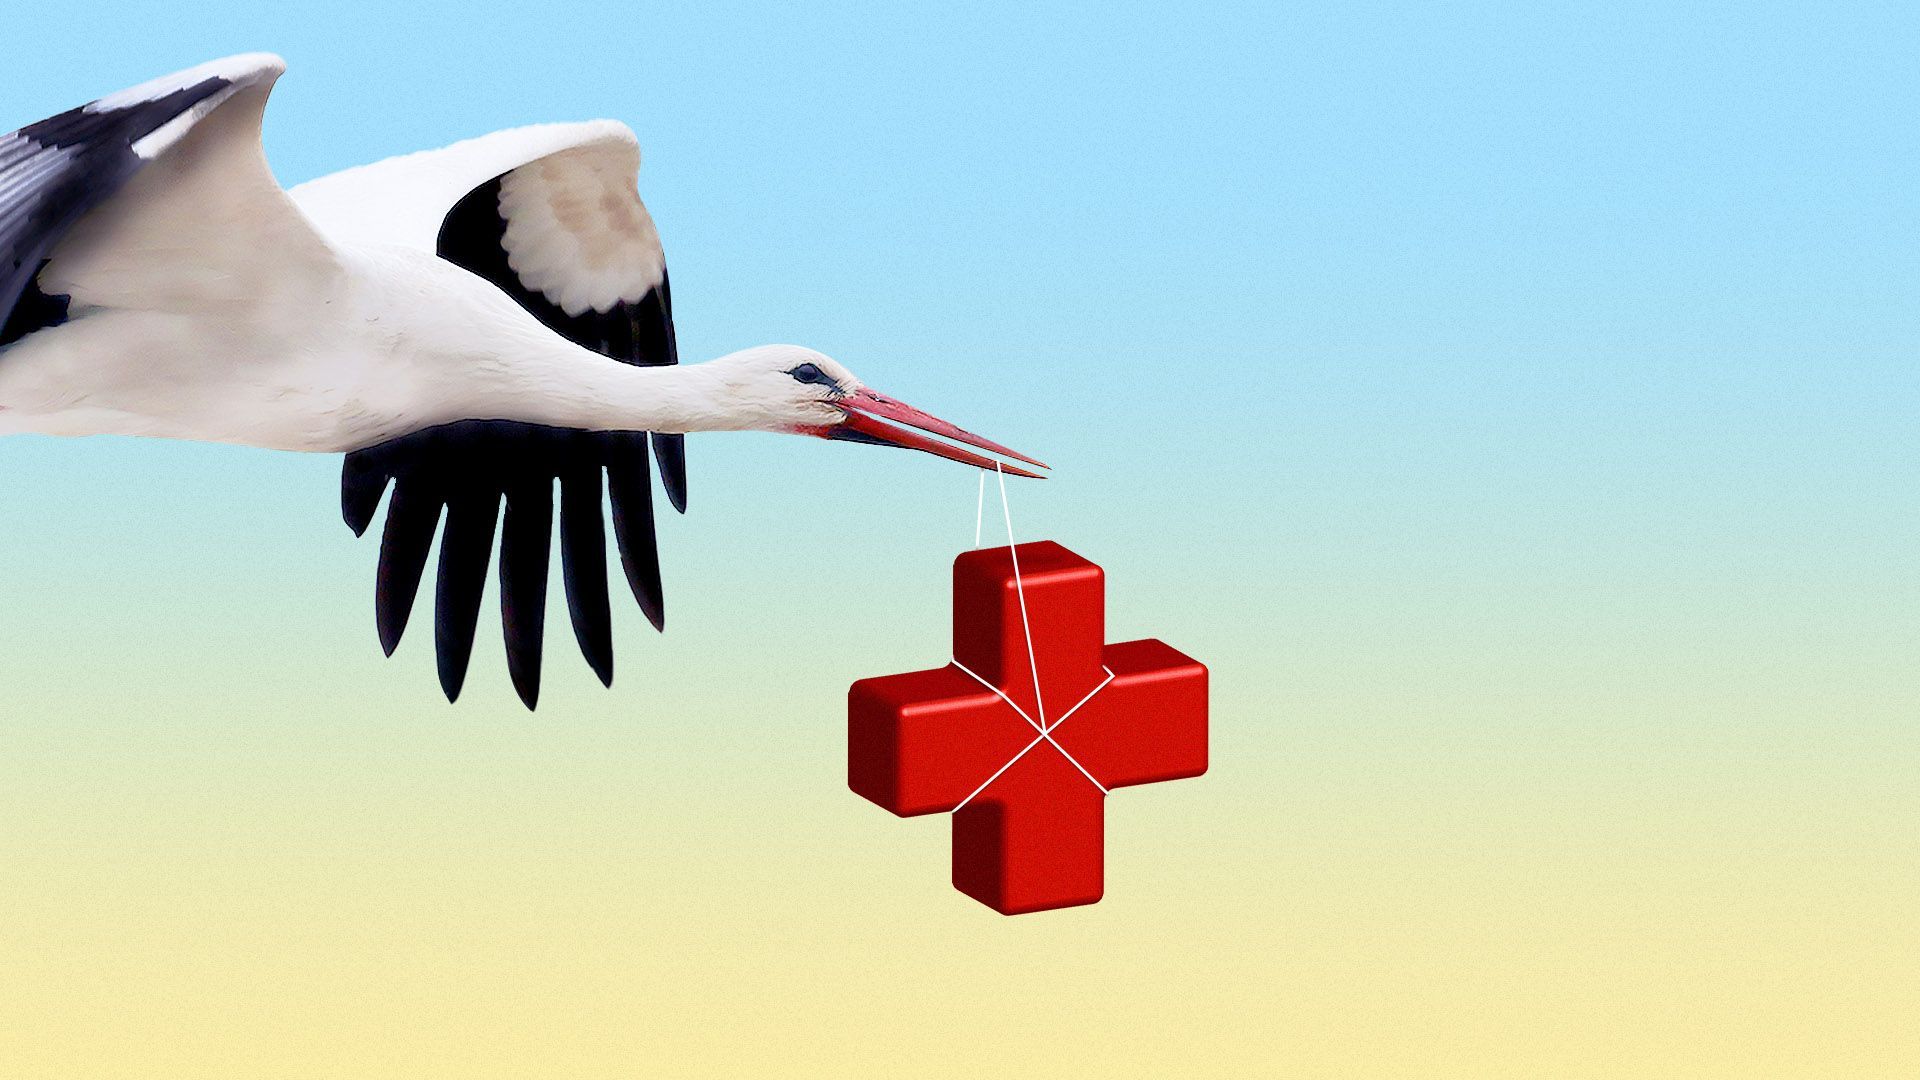 Illustration of a stork carrying a red cross